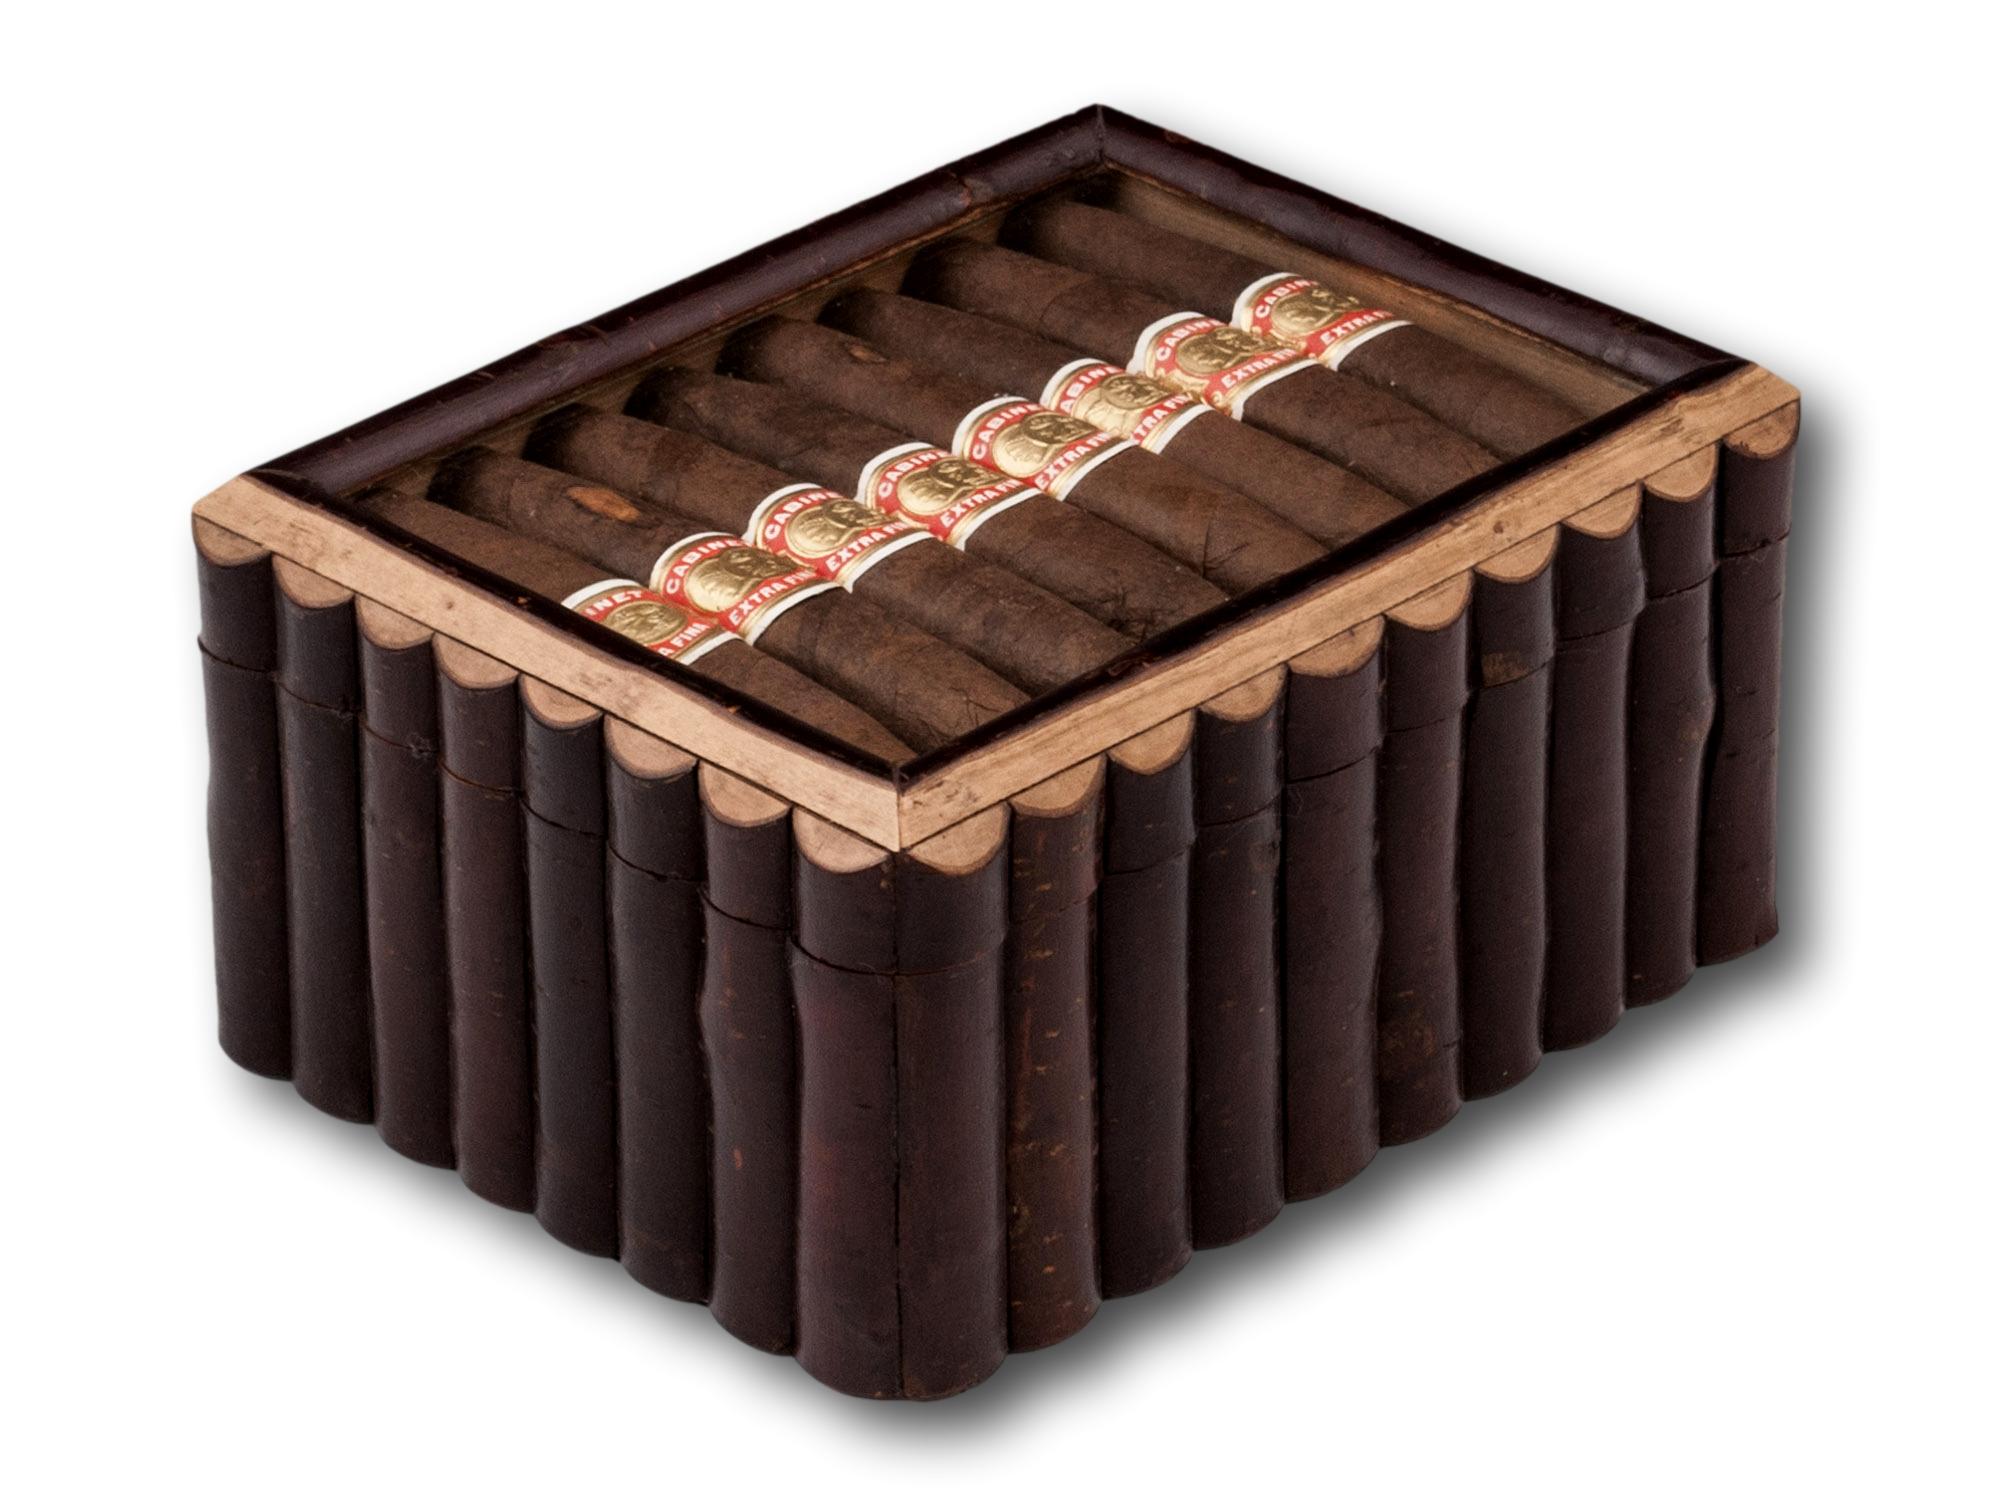 Novelty Cigar Topped Humidor

The box of oblong shape with a ribbed exterior crafted from Birchwood Bark with a fantastic Novelty lid housing eight Cabinet extra fine cigars. When opened the humidor reveals a maple lining perfect for storing your